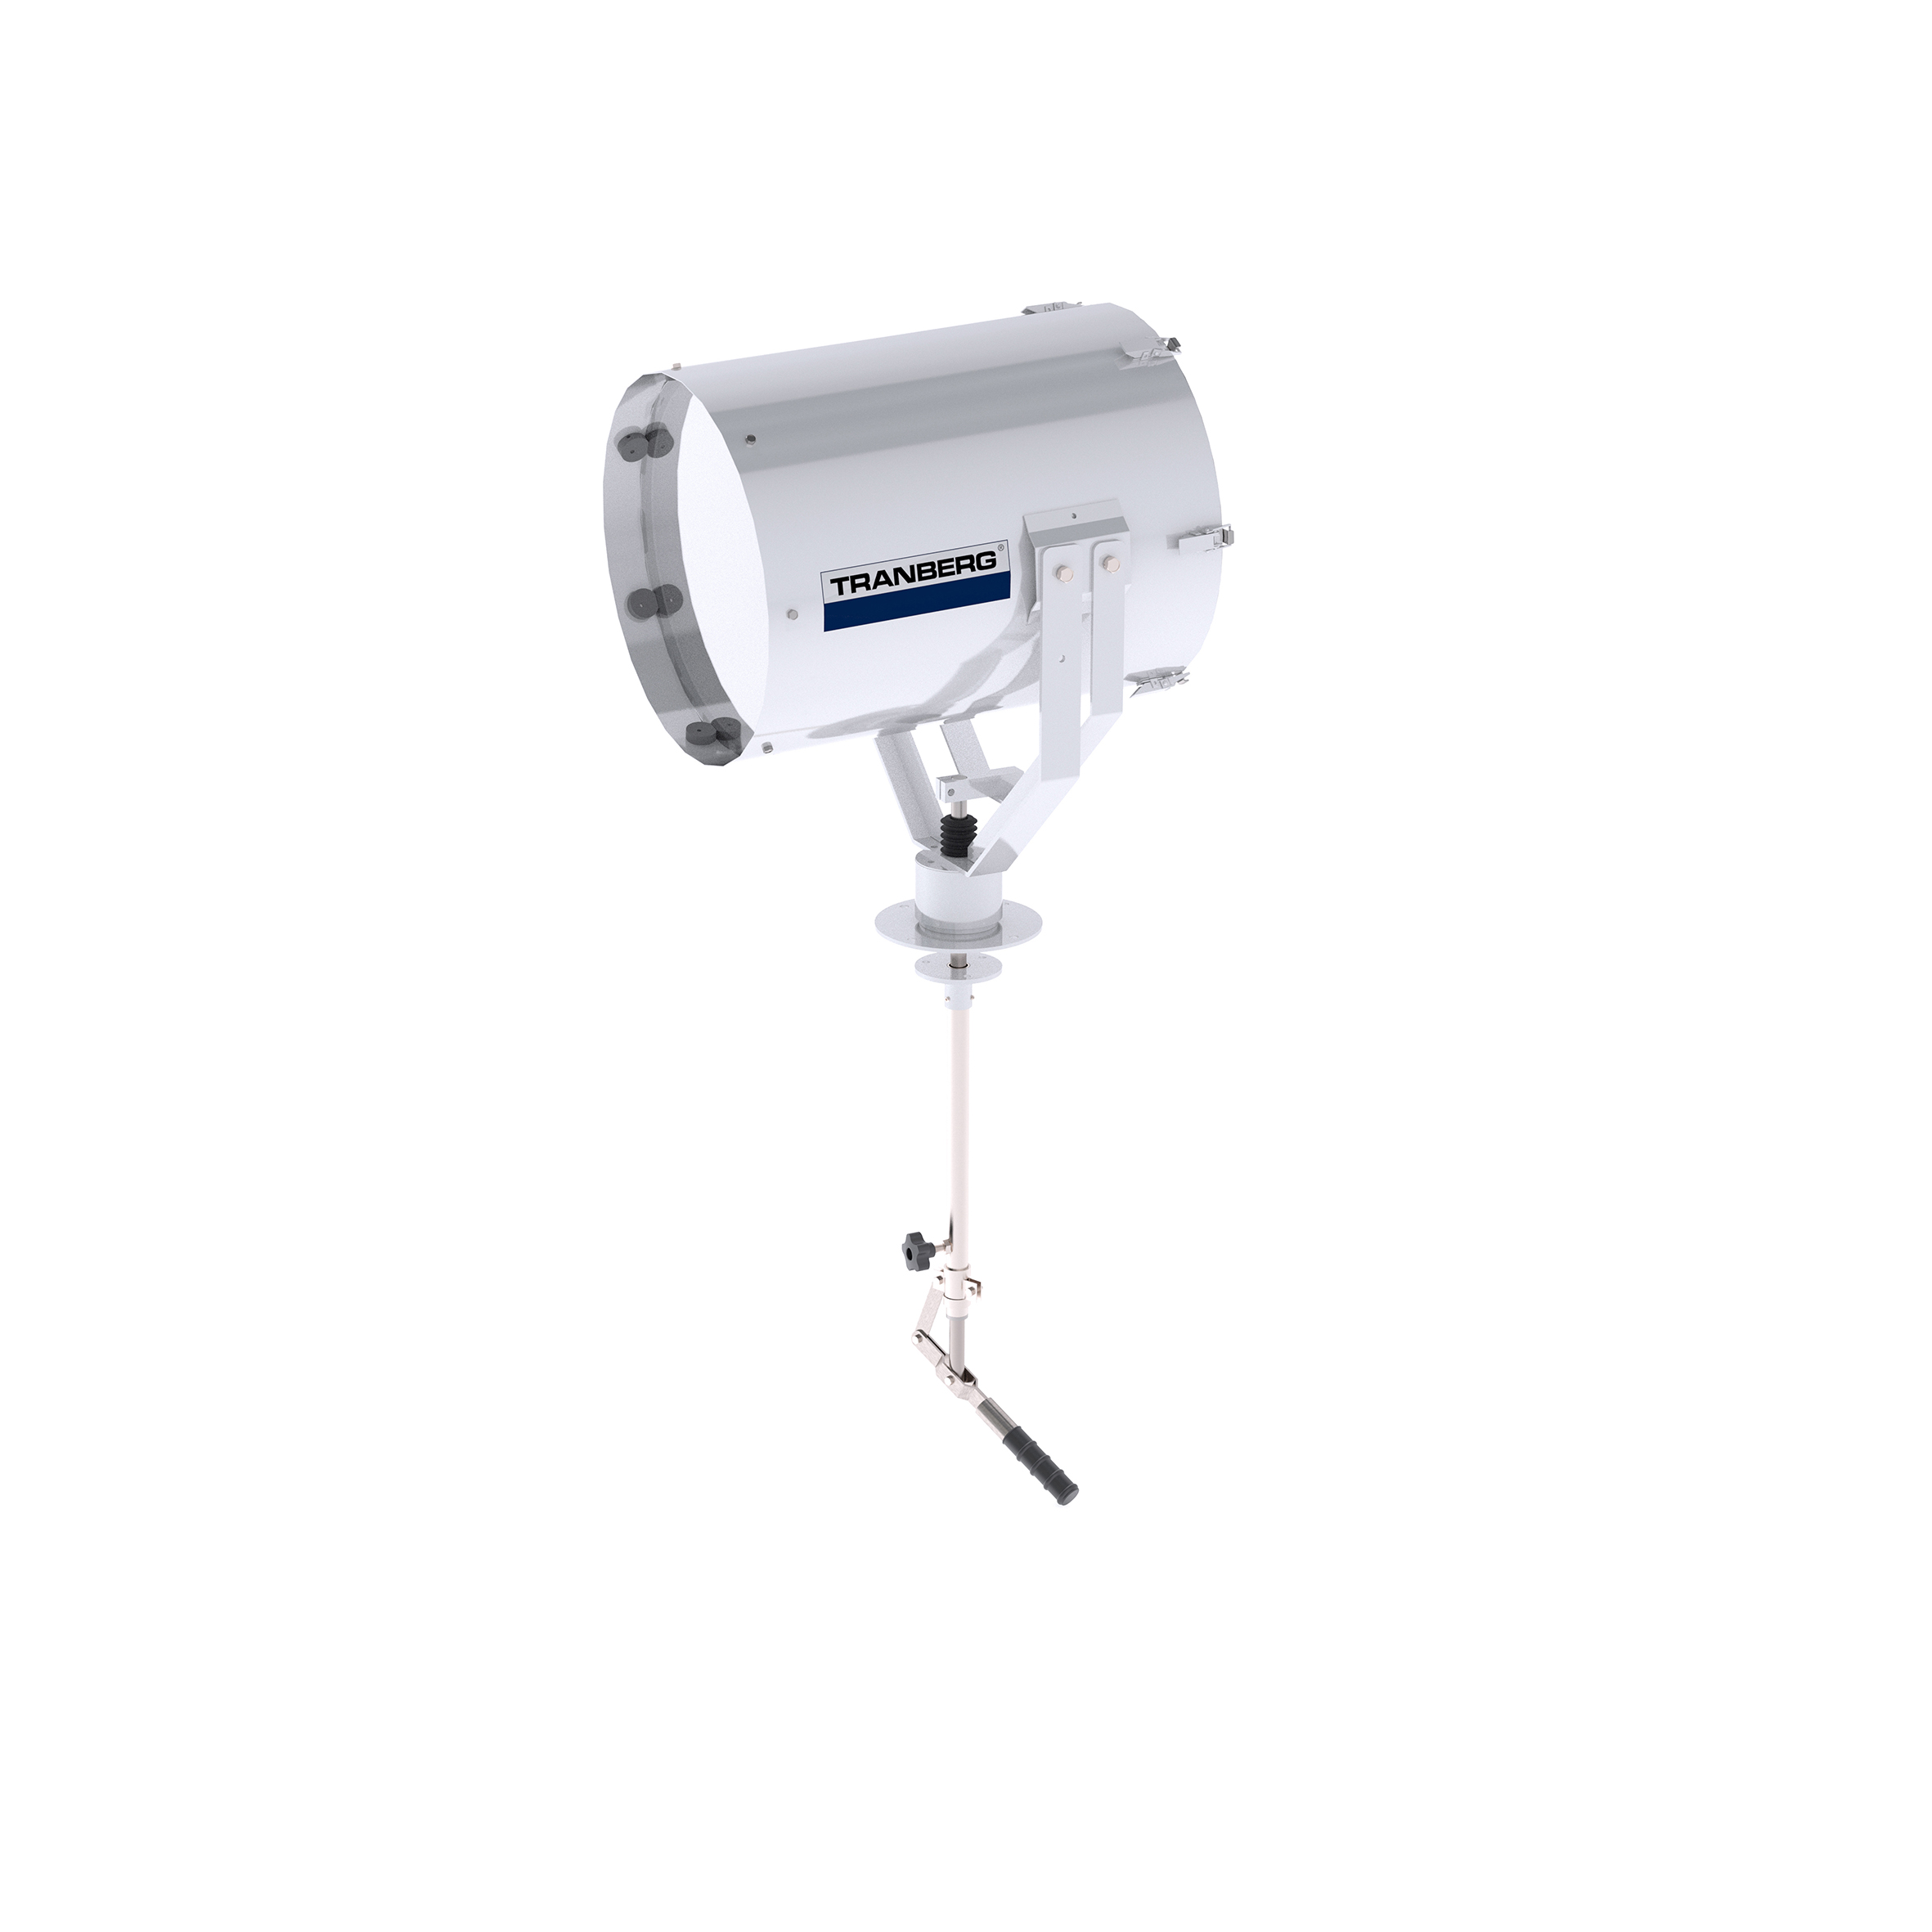 TEF 2630 Searchlight: Halogen 1000W bulb incl, 230V, Bridge Controlled, Stainless Steel